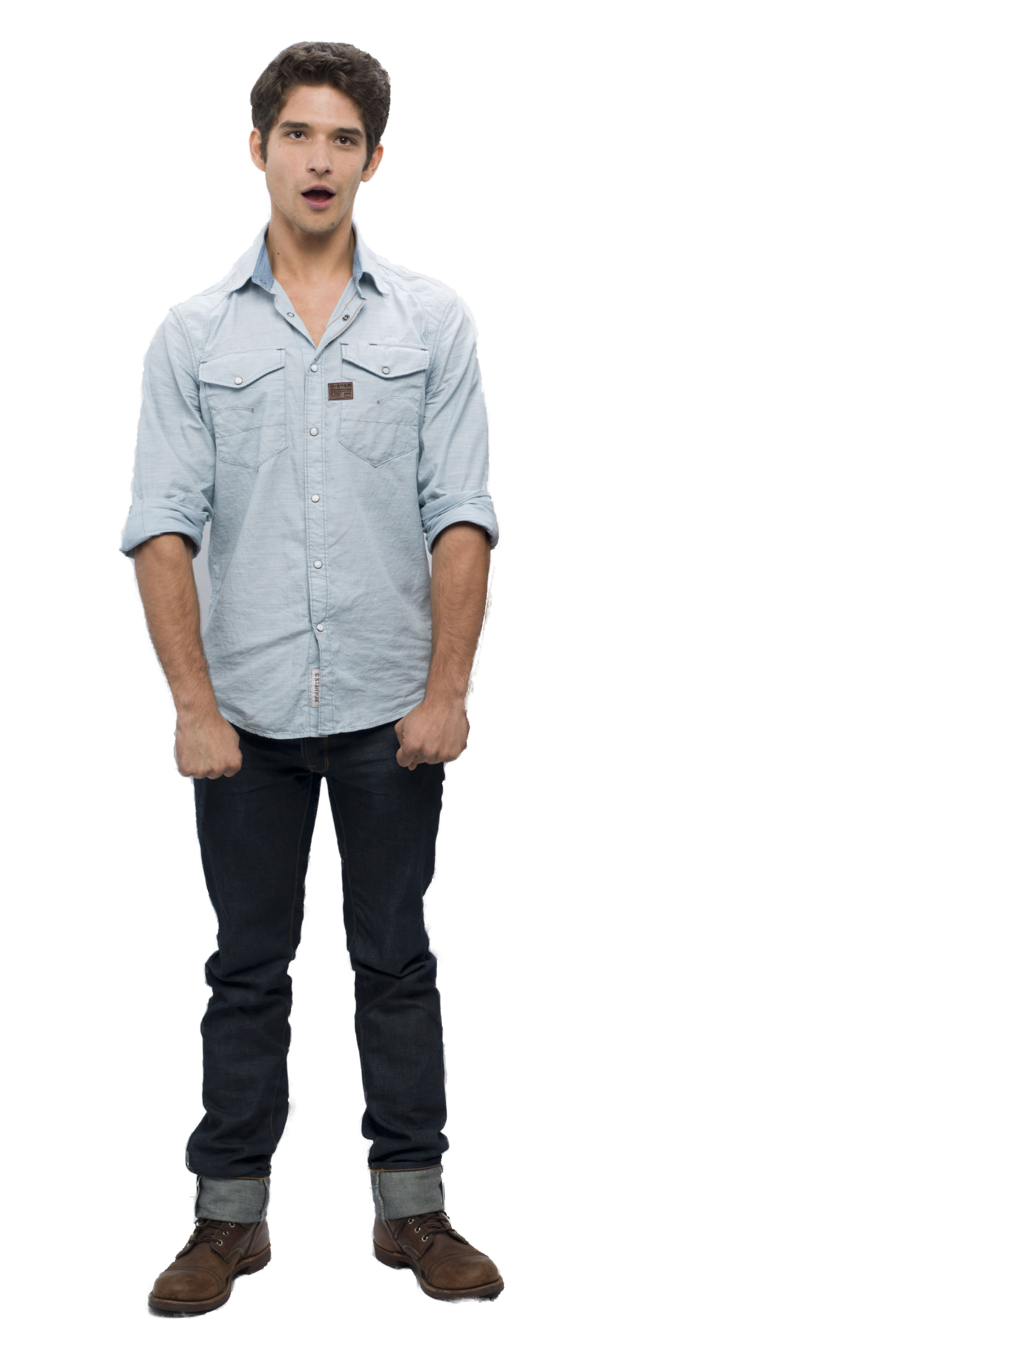 Tyler Posey PNG - 24532